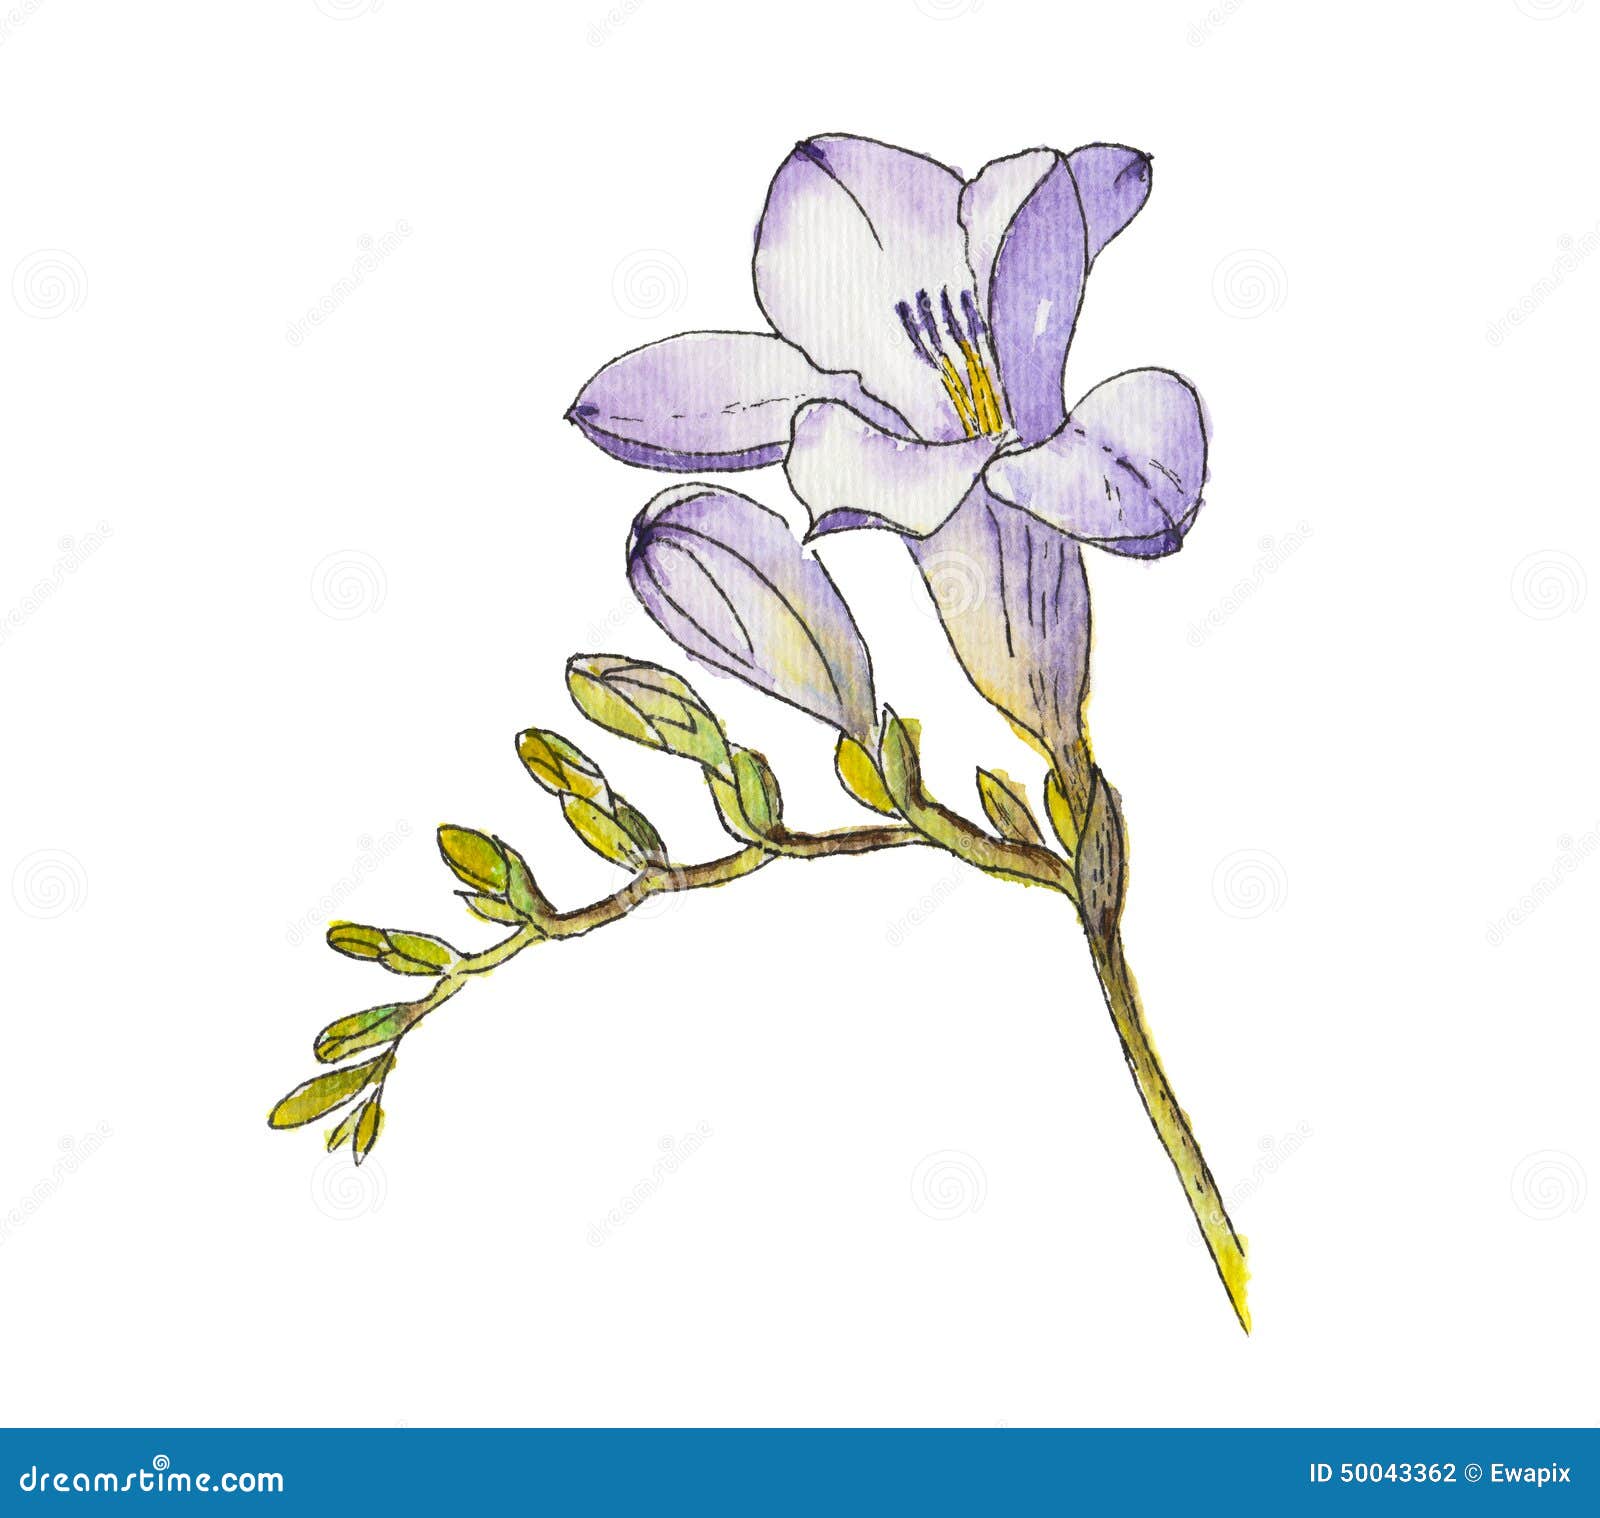 Watercolor Of Freesia Flower. Stock Illustration  Image: 50043362